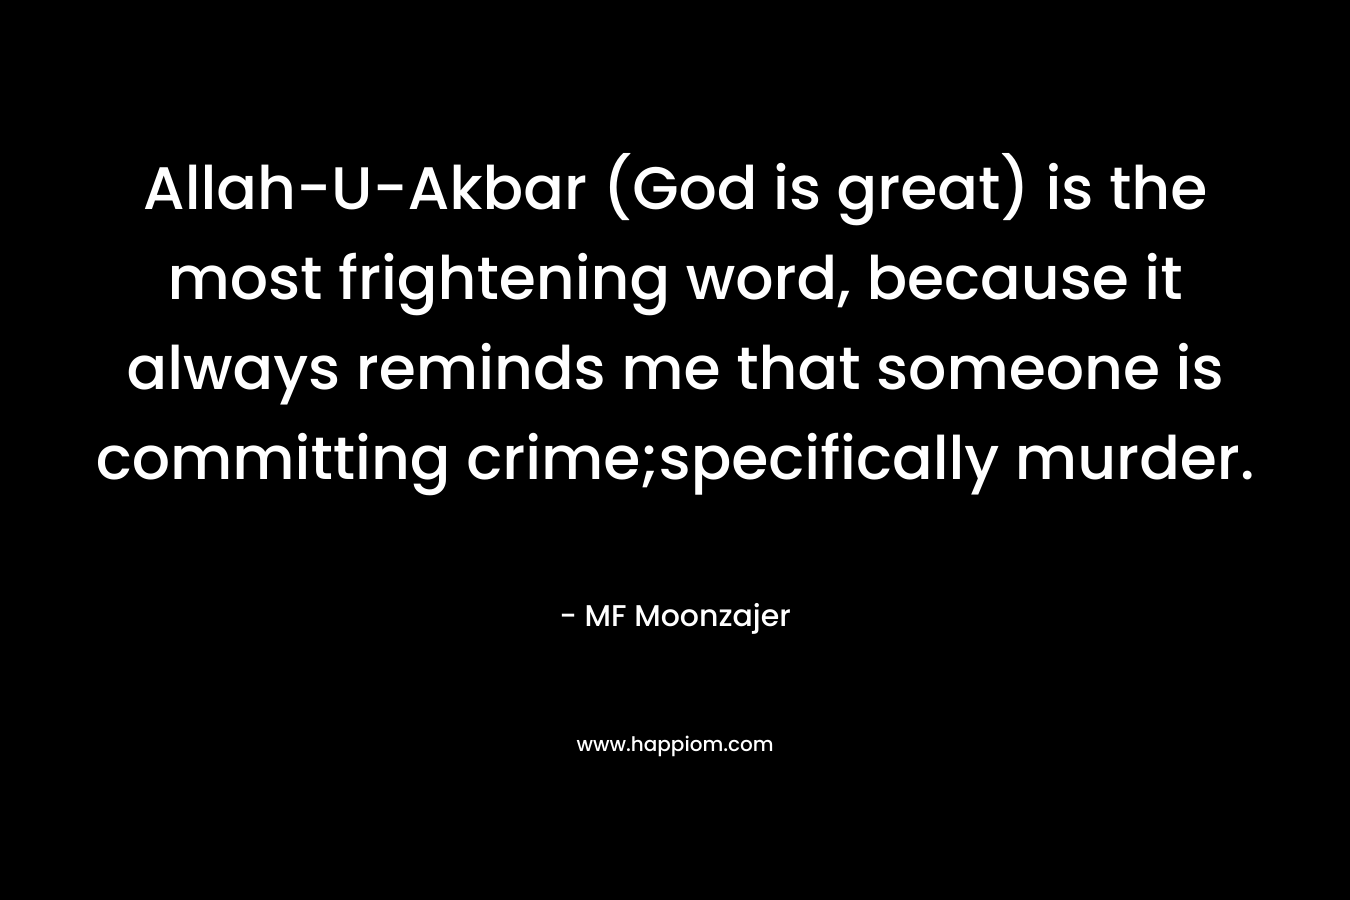 Allah-U-Akbar (God is great) is the most frightening word, because it always reminds me that someone is committing crime;specifically murder. – MF Moonzajer